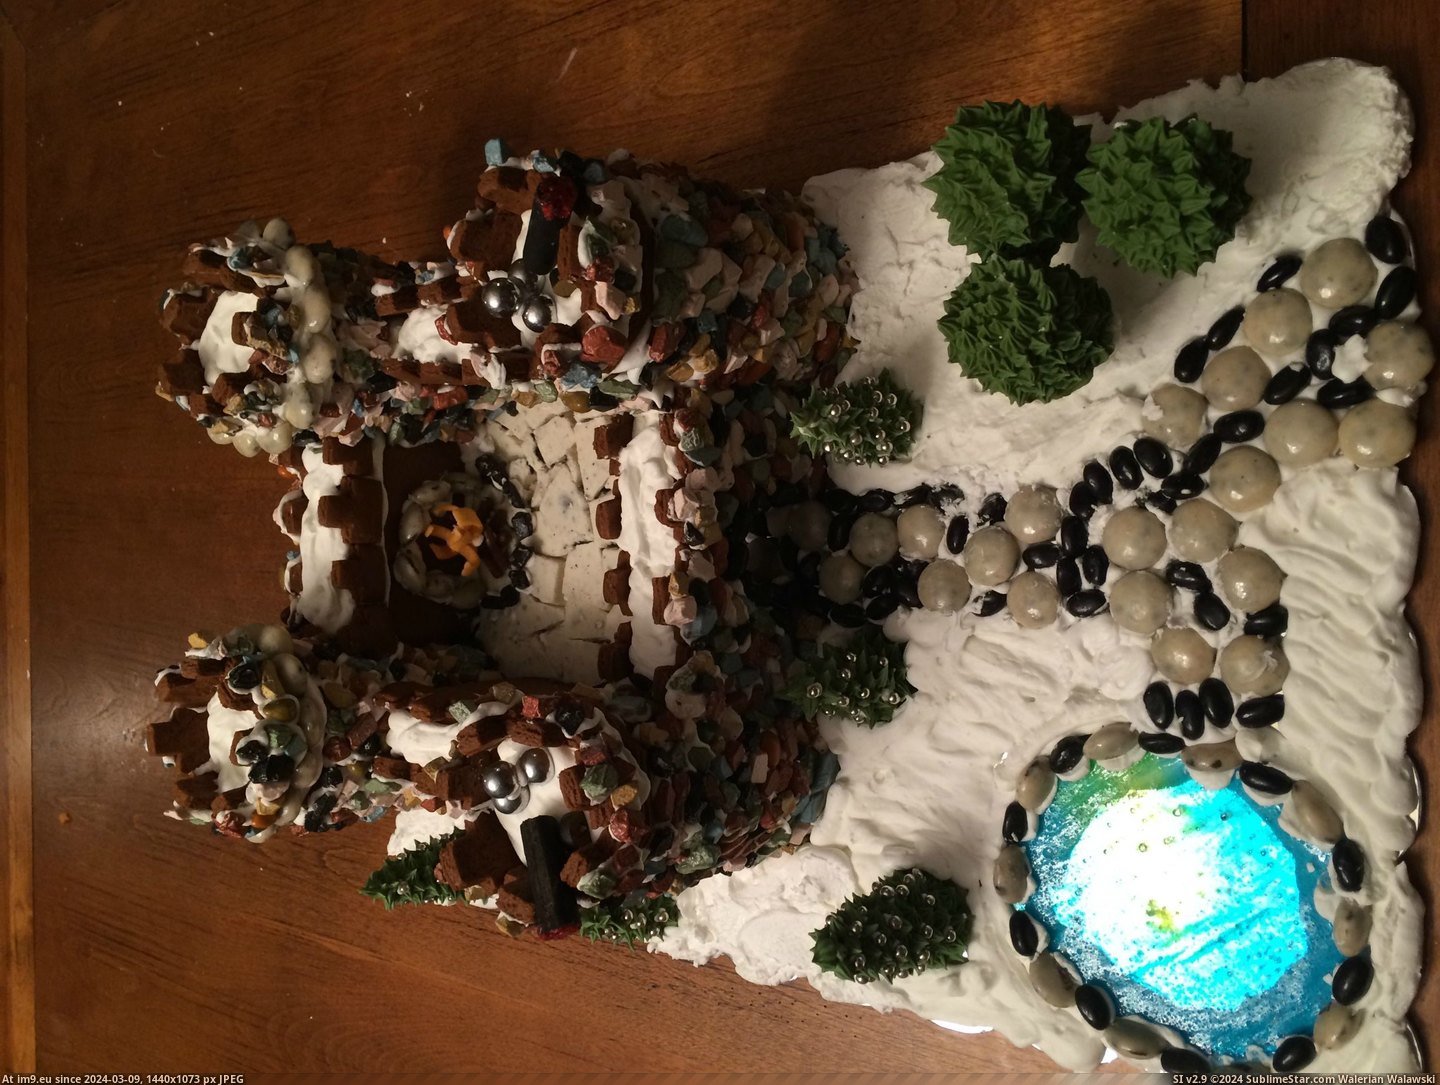 #Husband #Get #Our #Divorced #Collaborated #Project #Gingerbread #Success [Pics] My husband and I collaborated on our first gingerbread project and didn't get divorced...success! 5 Pic. (Image of album My r/PICS favs))